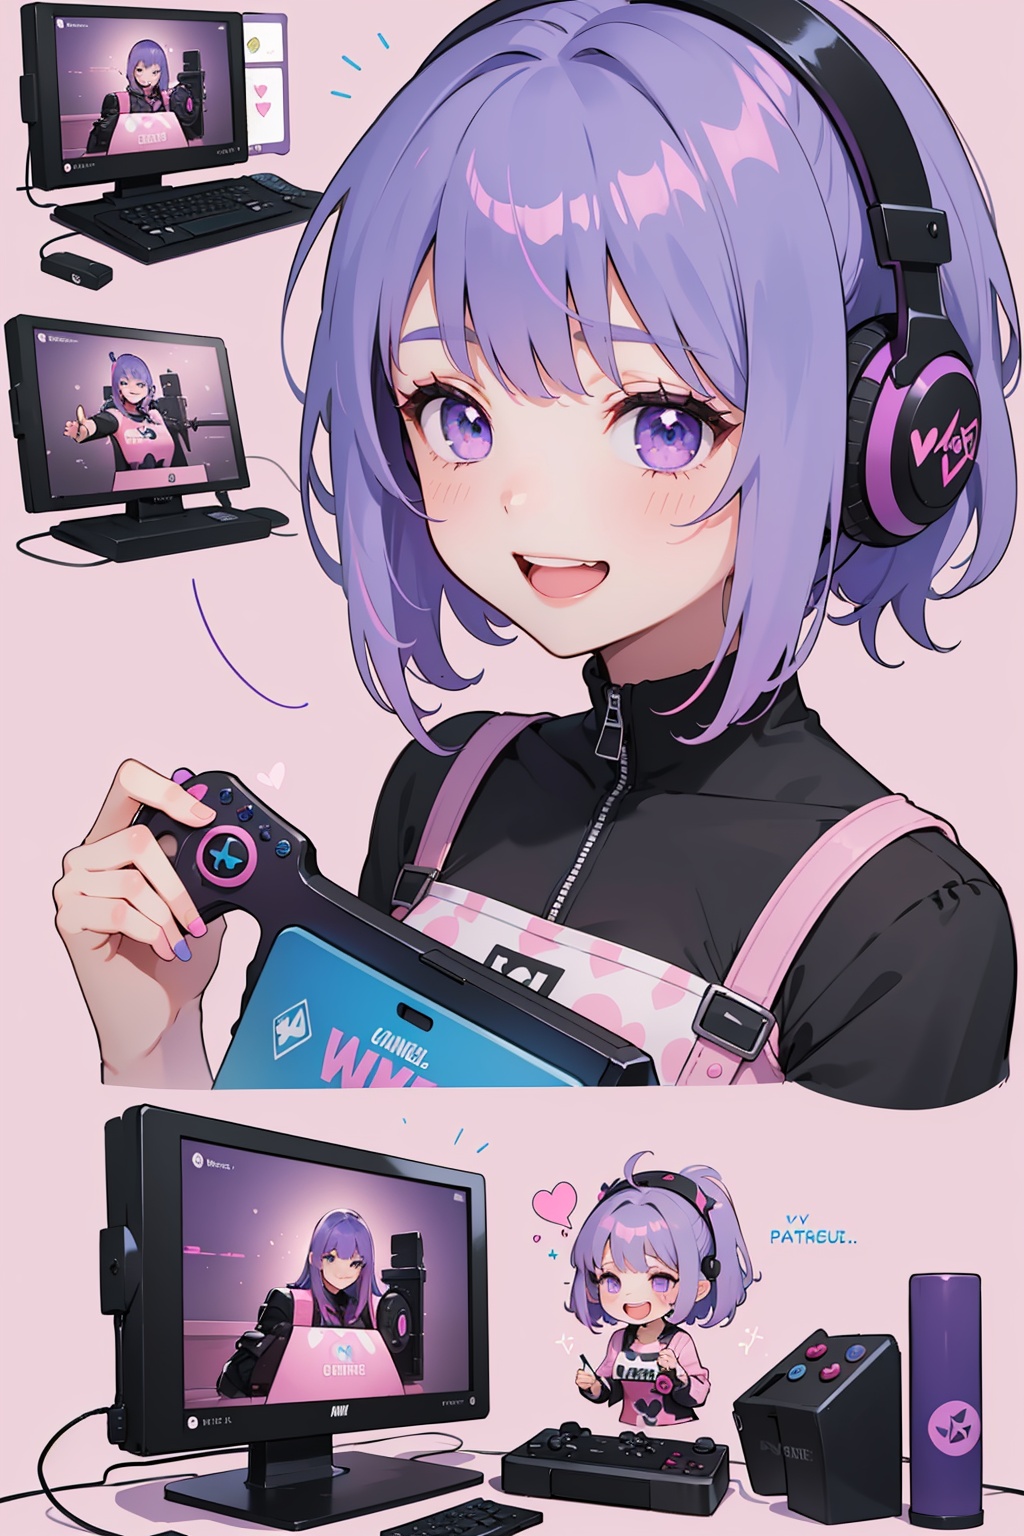 ( 1girl is happy and laughing) ((Pure purple and pink background:1.2)),A girl with vibrant blue hair,adorned with gaming  paraphernalia,looks contemplatively aside. (She's surrounded by a collage of video game references,emphasizing a love for gaming culture:1).,